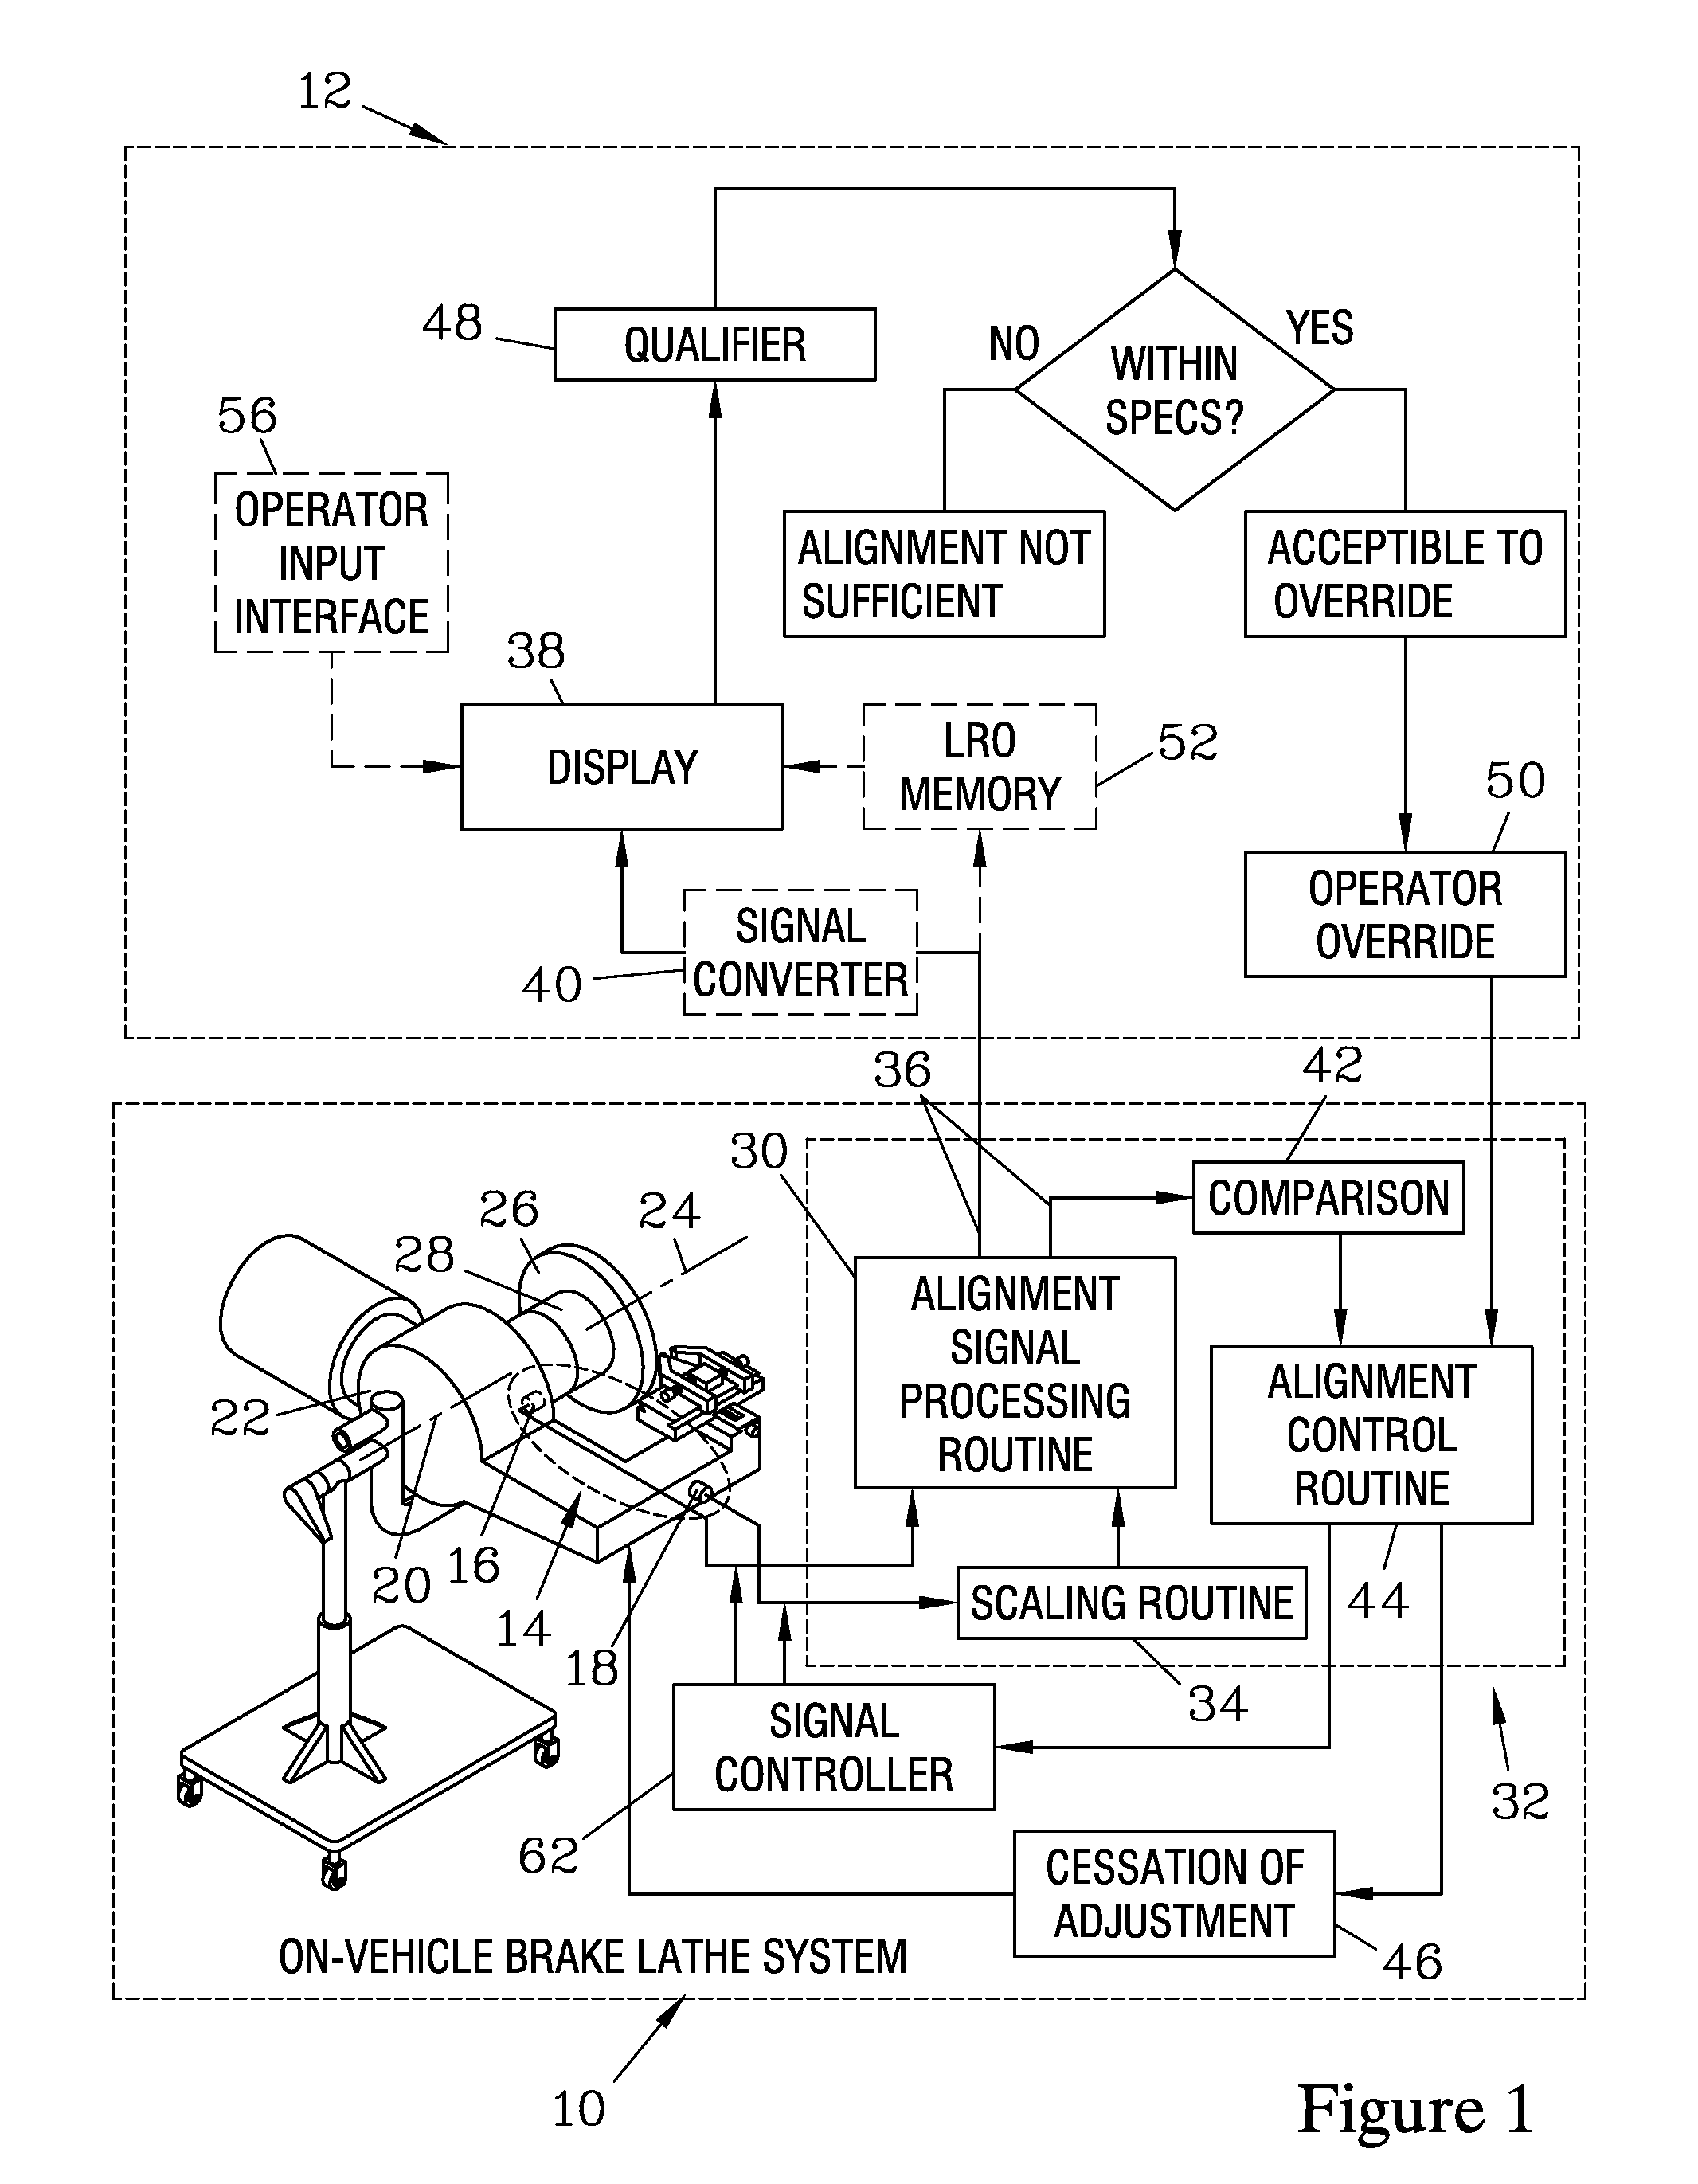 Dynamic alignment monitoring system for on-vehicle disk brake lathe